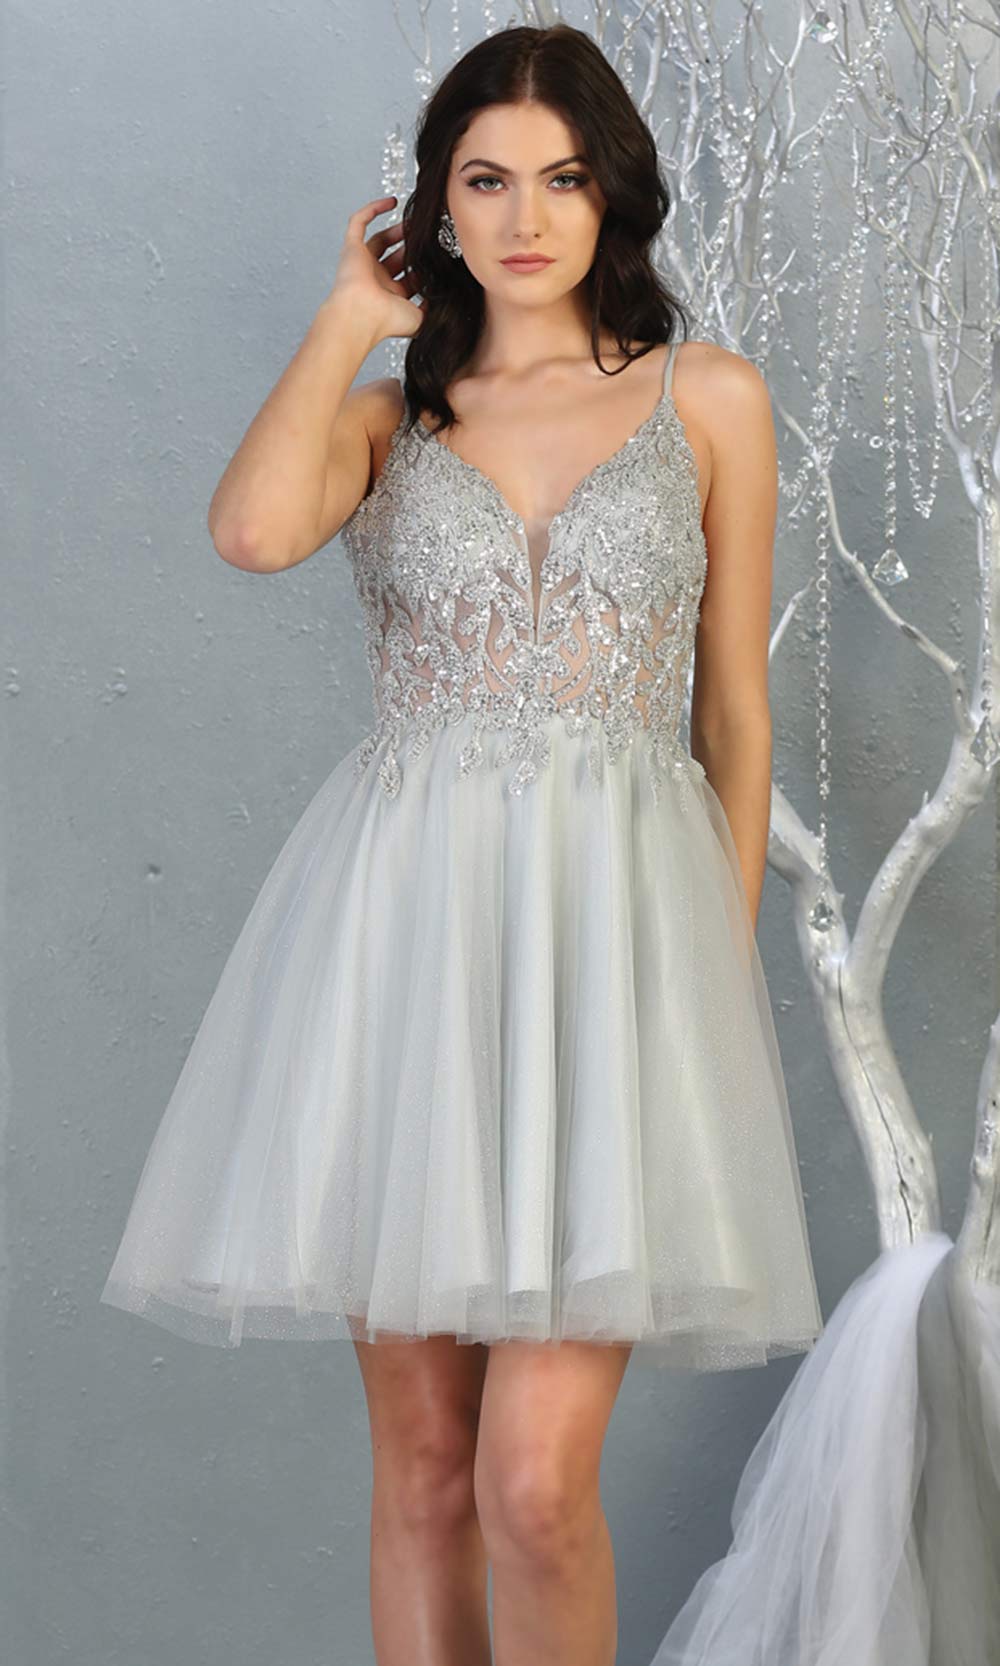 Mayqueen MQ1813 short silver sequin flowy vneck grade 8 graduation dress w/ straps & puffy skirt. Light grey party dress is perfect for prom, graduation, grade 8 grad, confirmation dress, bat mitzvah dress, damas. Plus sizes avail for grad dress.jpggrade 8 grad dresses, graduation dresses